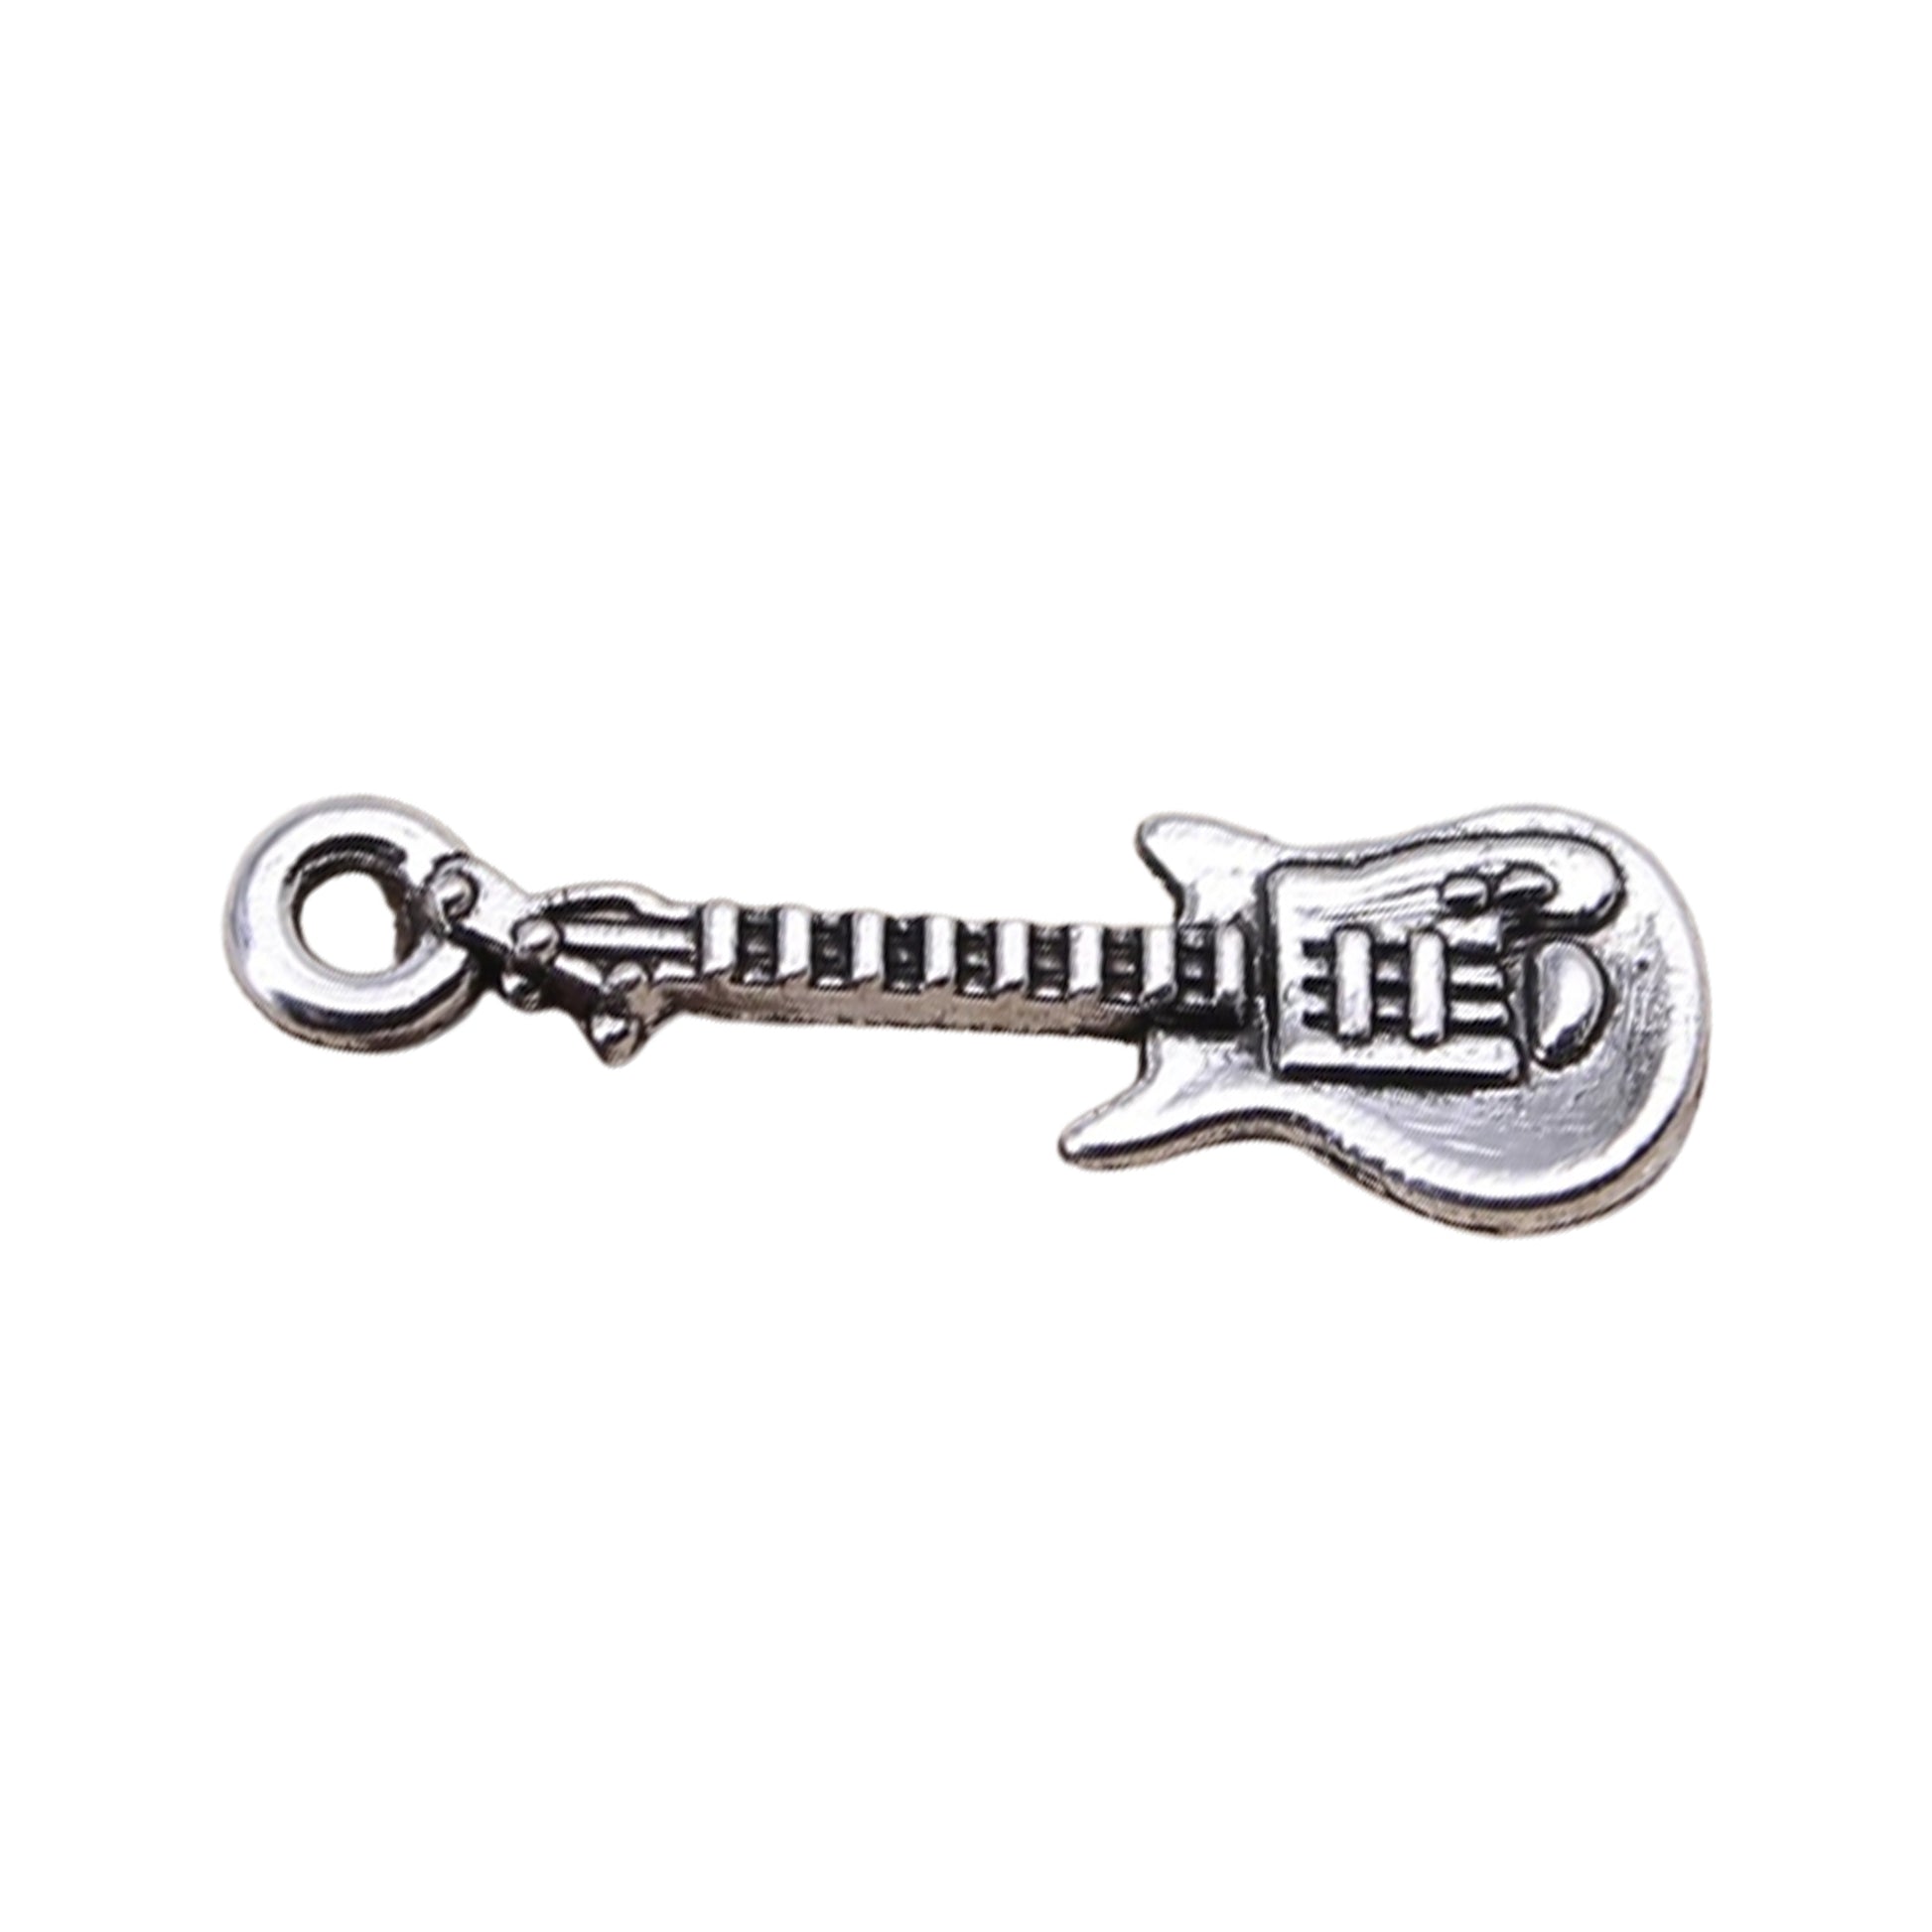 20pcs Antique Silver Colour Guitar Charms Pendant 24x7mm For Jewelry Making DIY Jewelry Findings